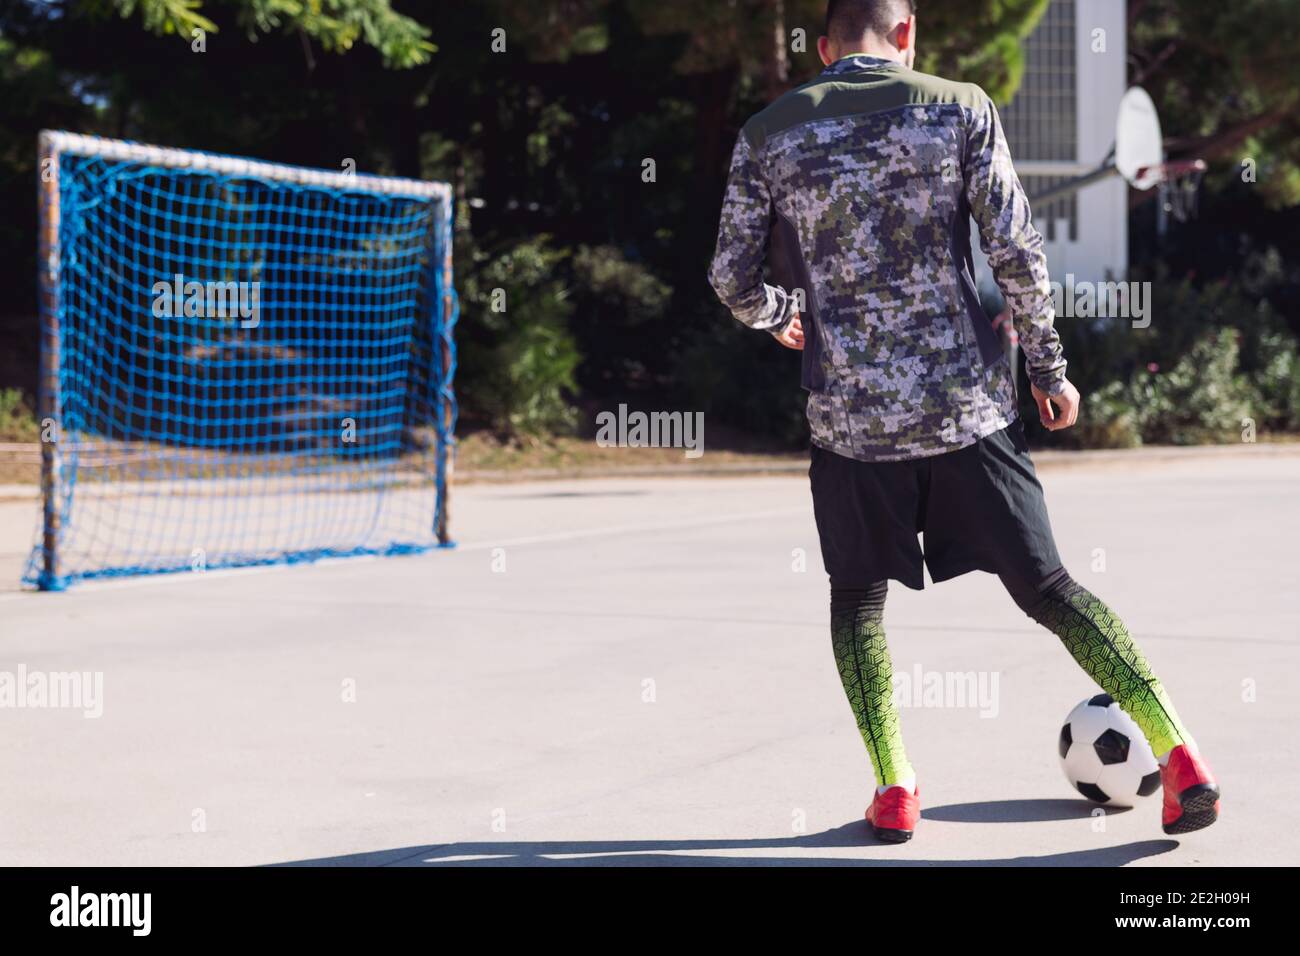 Rear View Of An Unrecognizable Football Player Kicking The Soccer Ball Into An Empty Goal In A Concrete Football Court Concept Of Healthy Lifestyle A Stock Photo Alamy